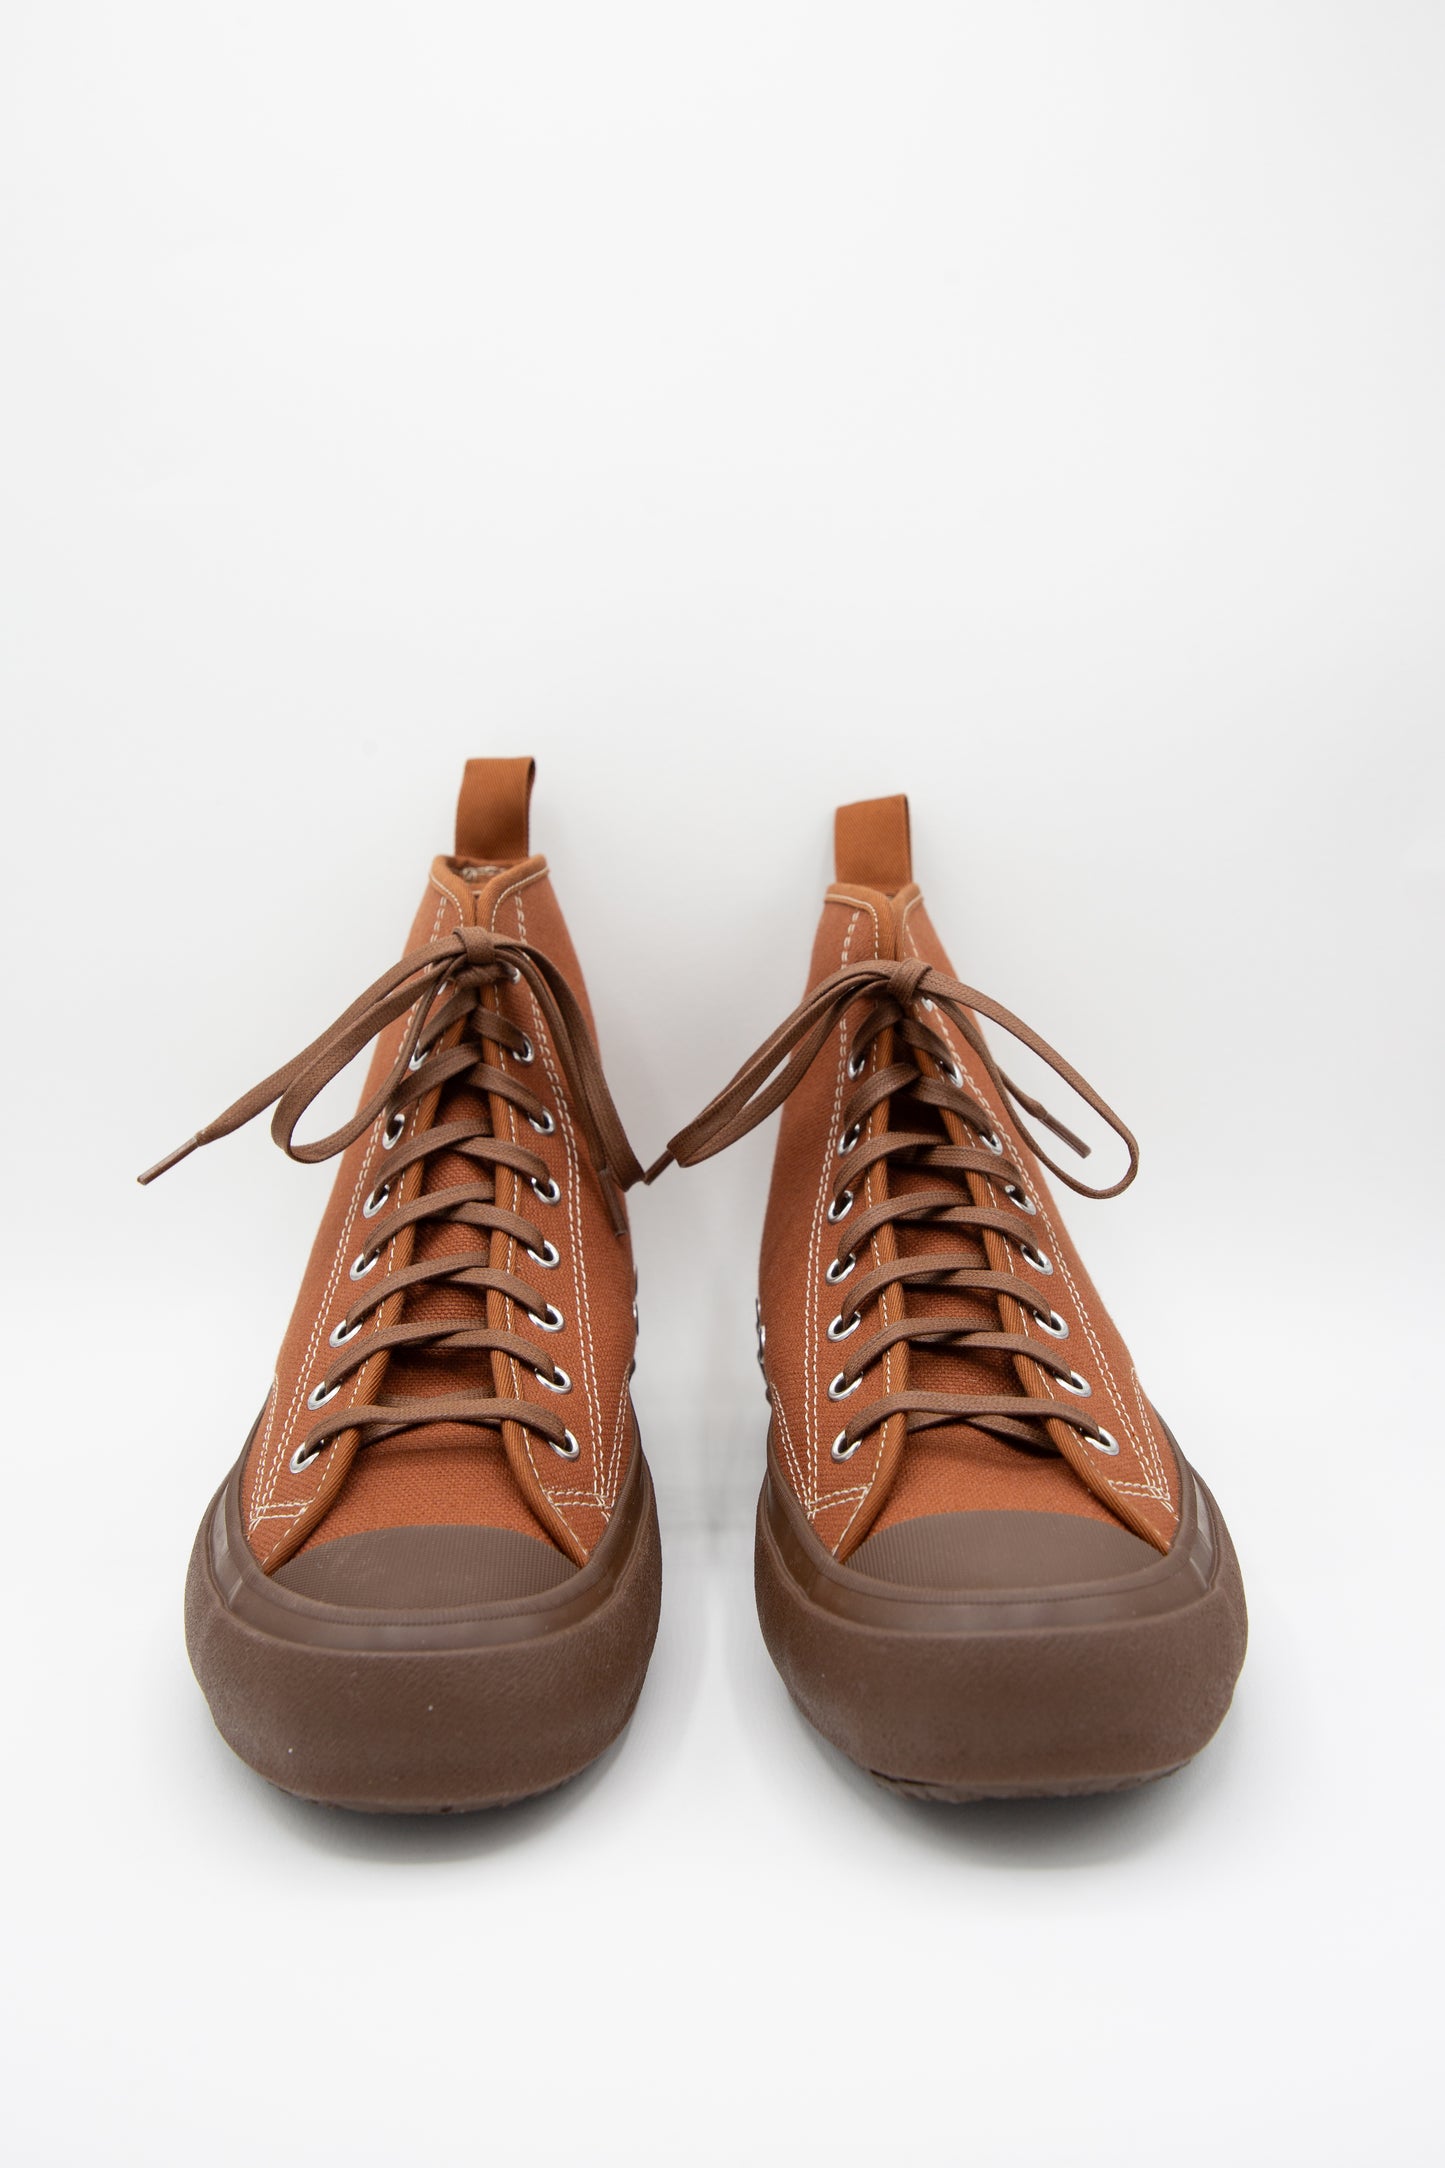 A pair of Moonstar Hibasket Sneaker in Brown with brown laces and rubber sole.